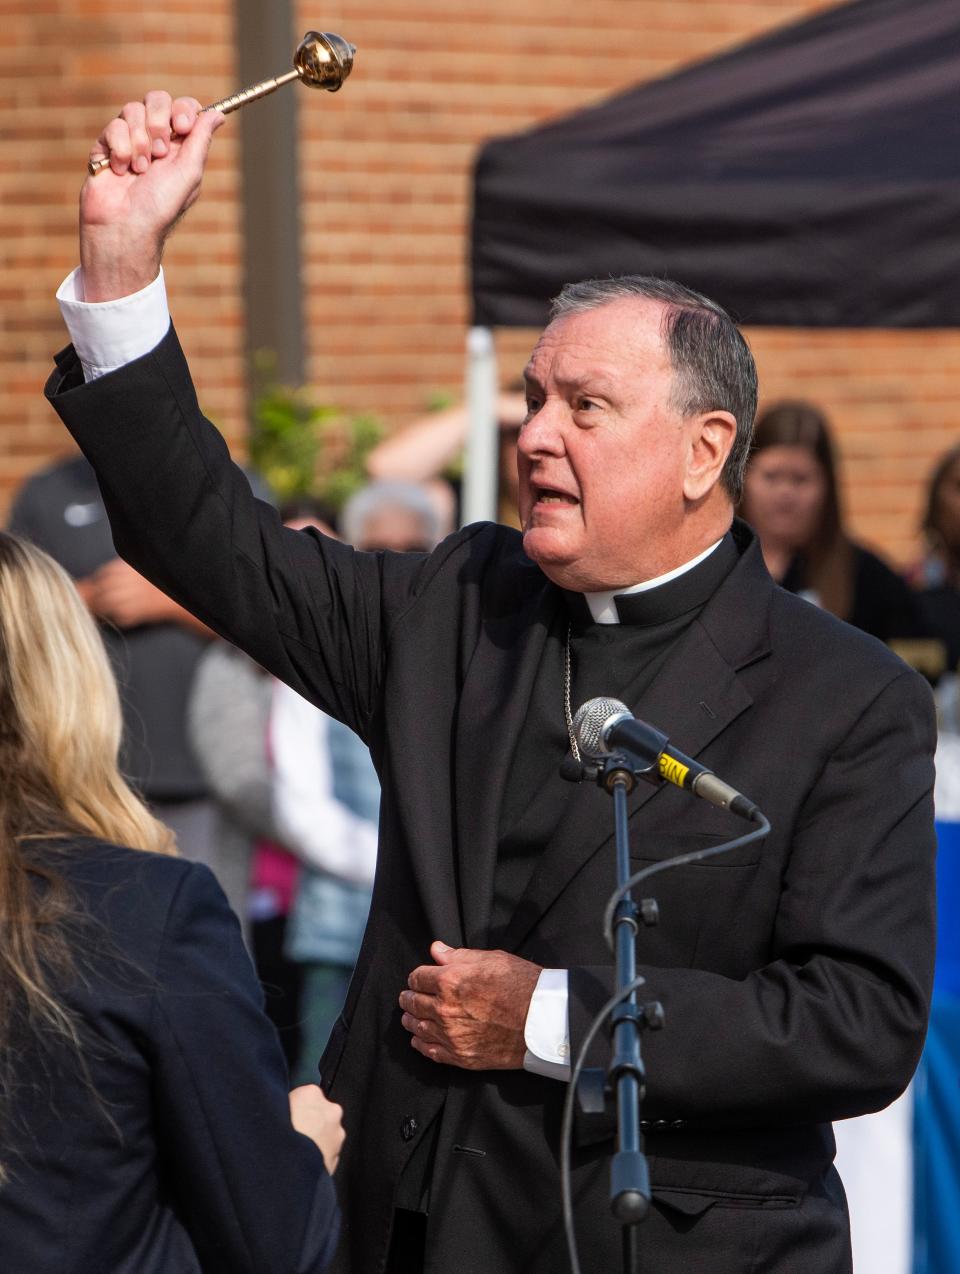 Thomas Rodi, Archbishop of Mobile, blesses Montgomery Catholic Preparatory School as it celebrates its 150th anniversary with a rededication and ribbon cutting ceremony Tuesday.